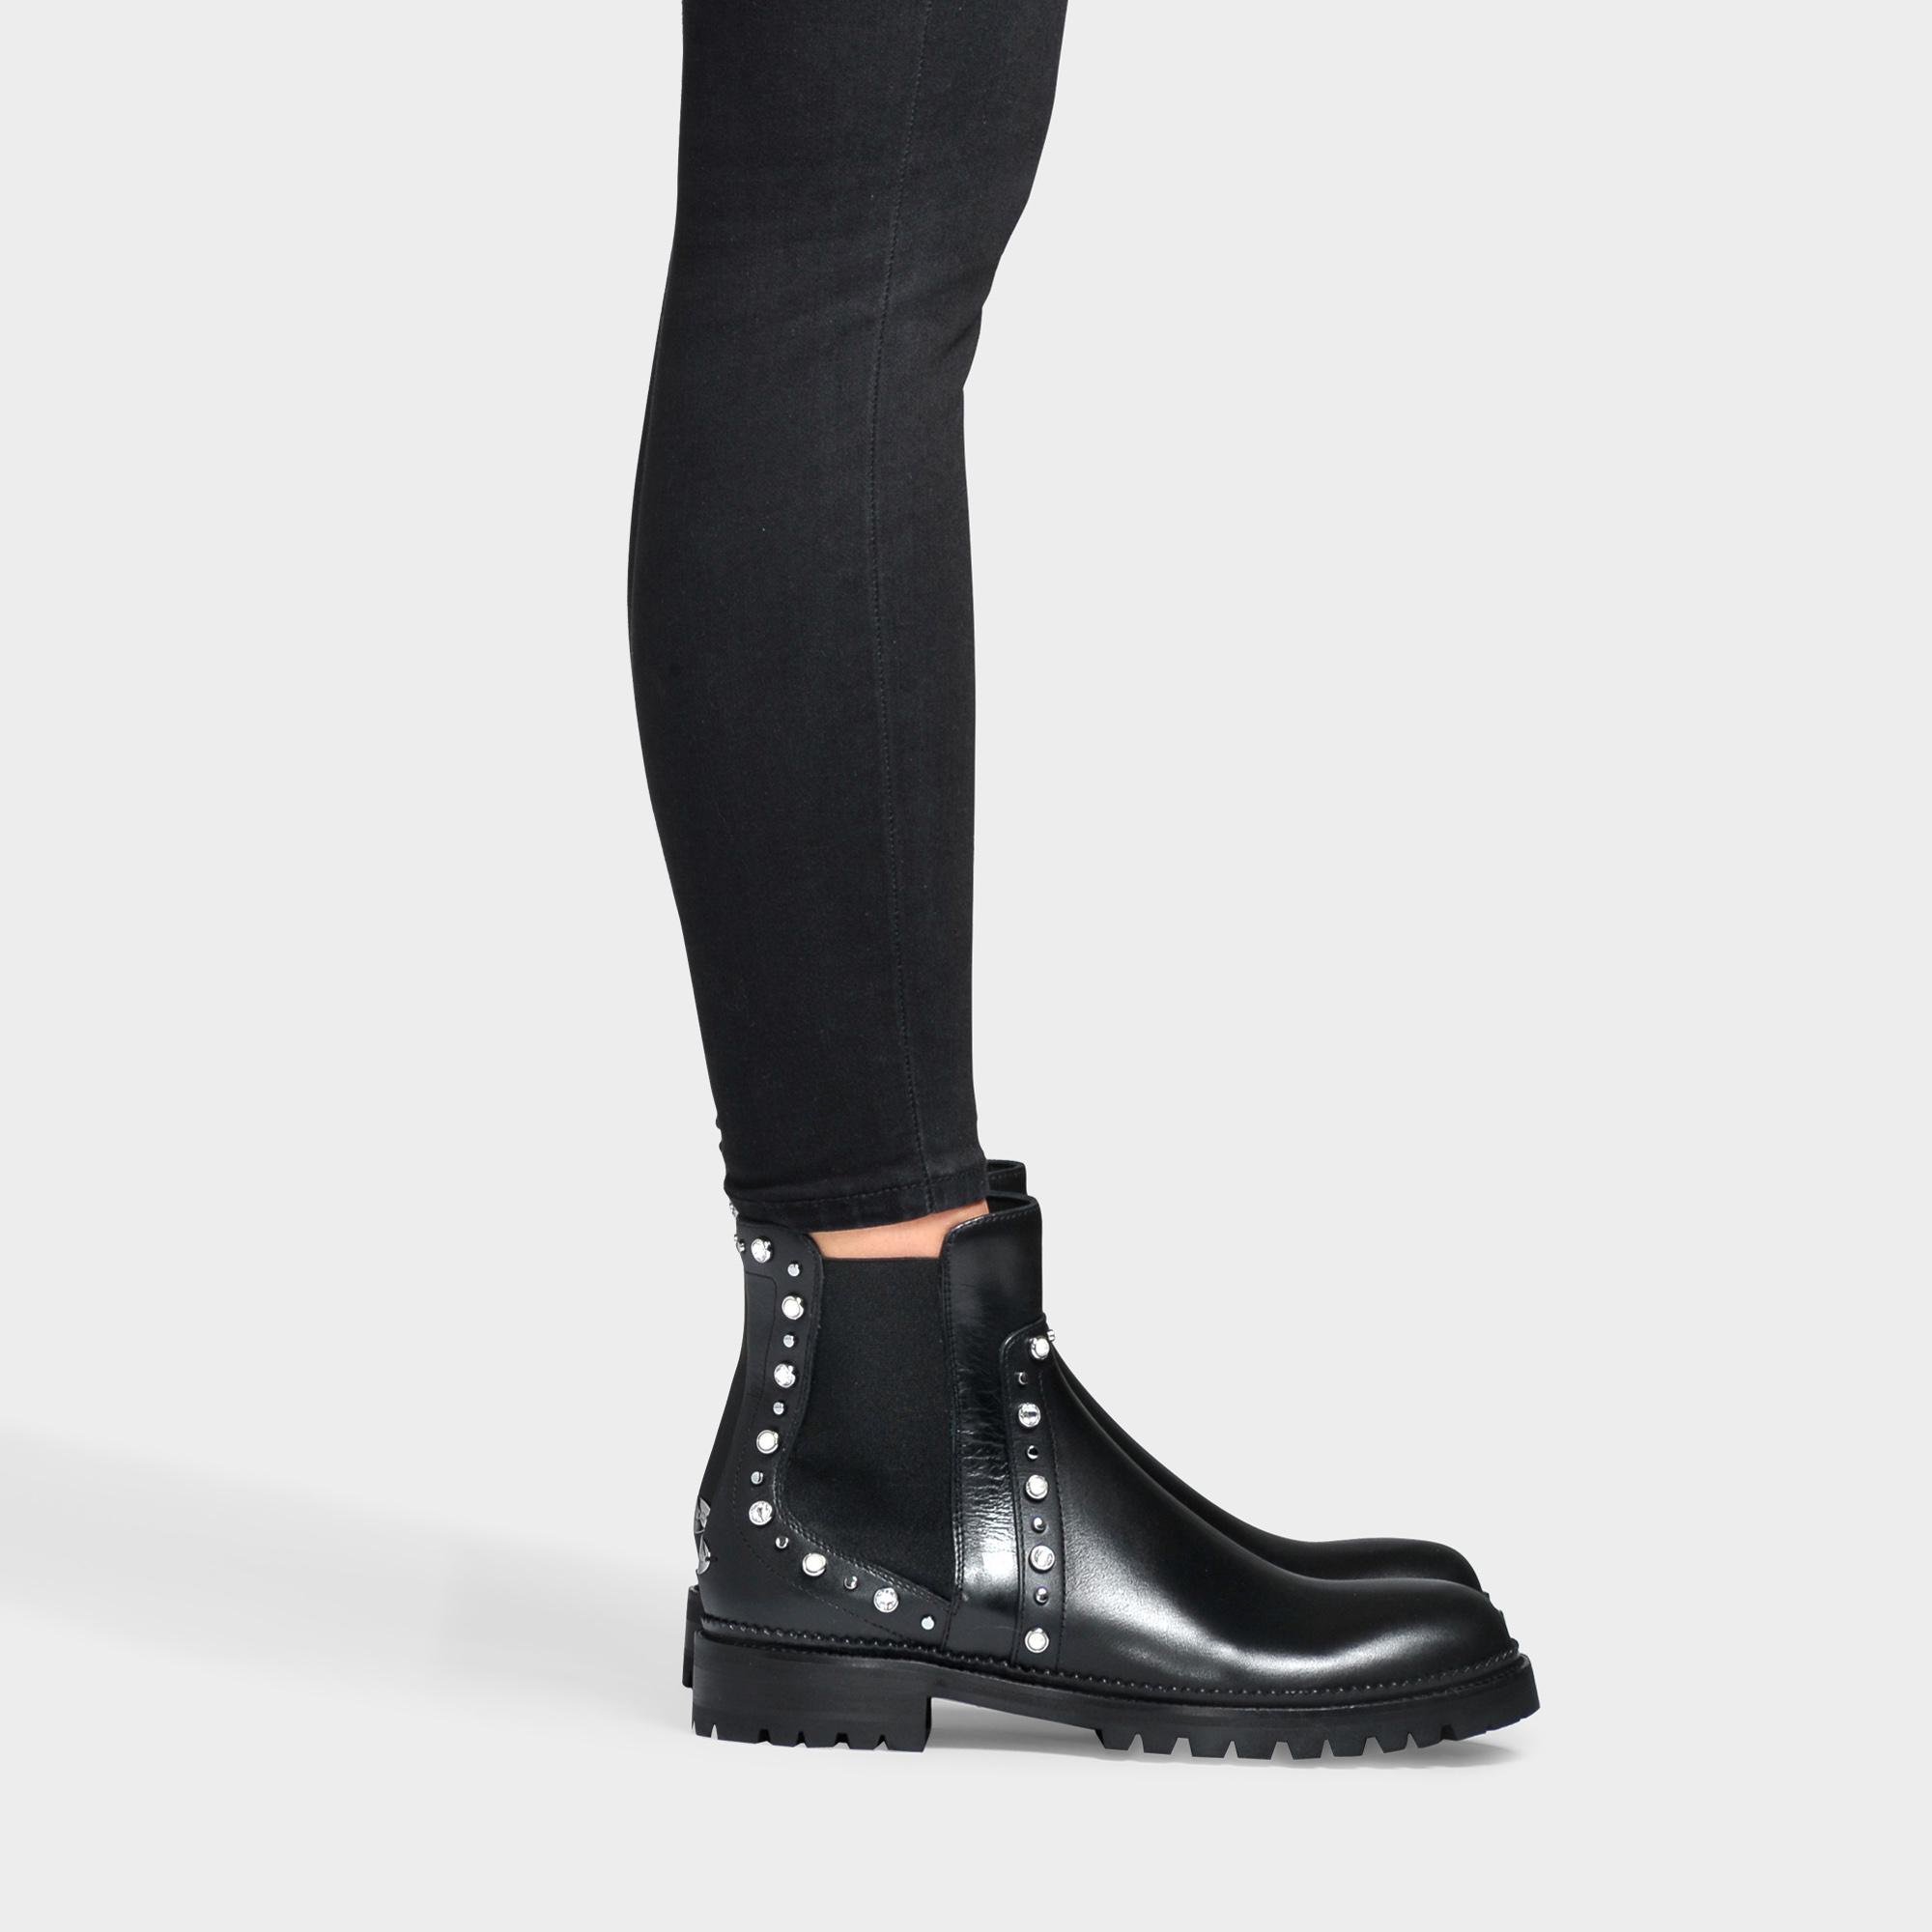 Jimmy Choo Burrow Embellished Leather Ankle Boots in Black - Lyst